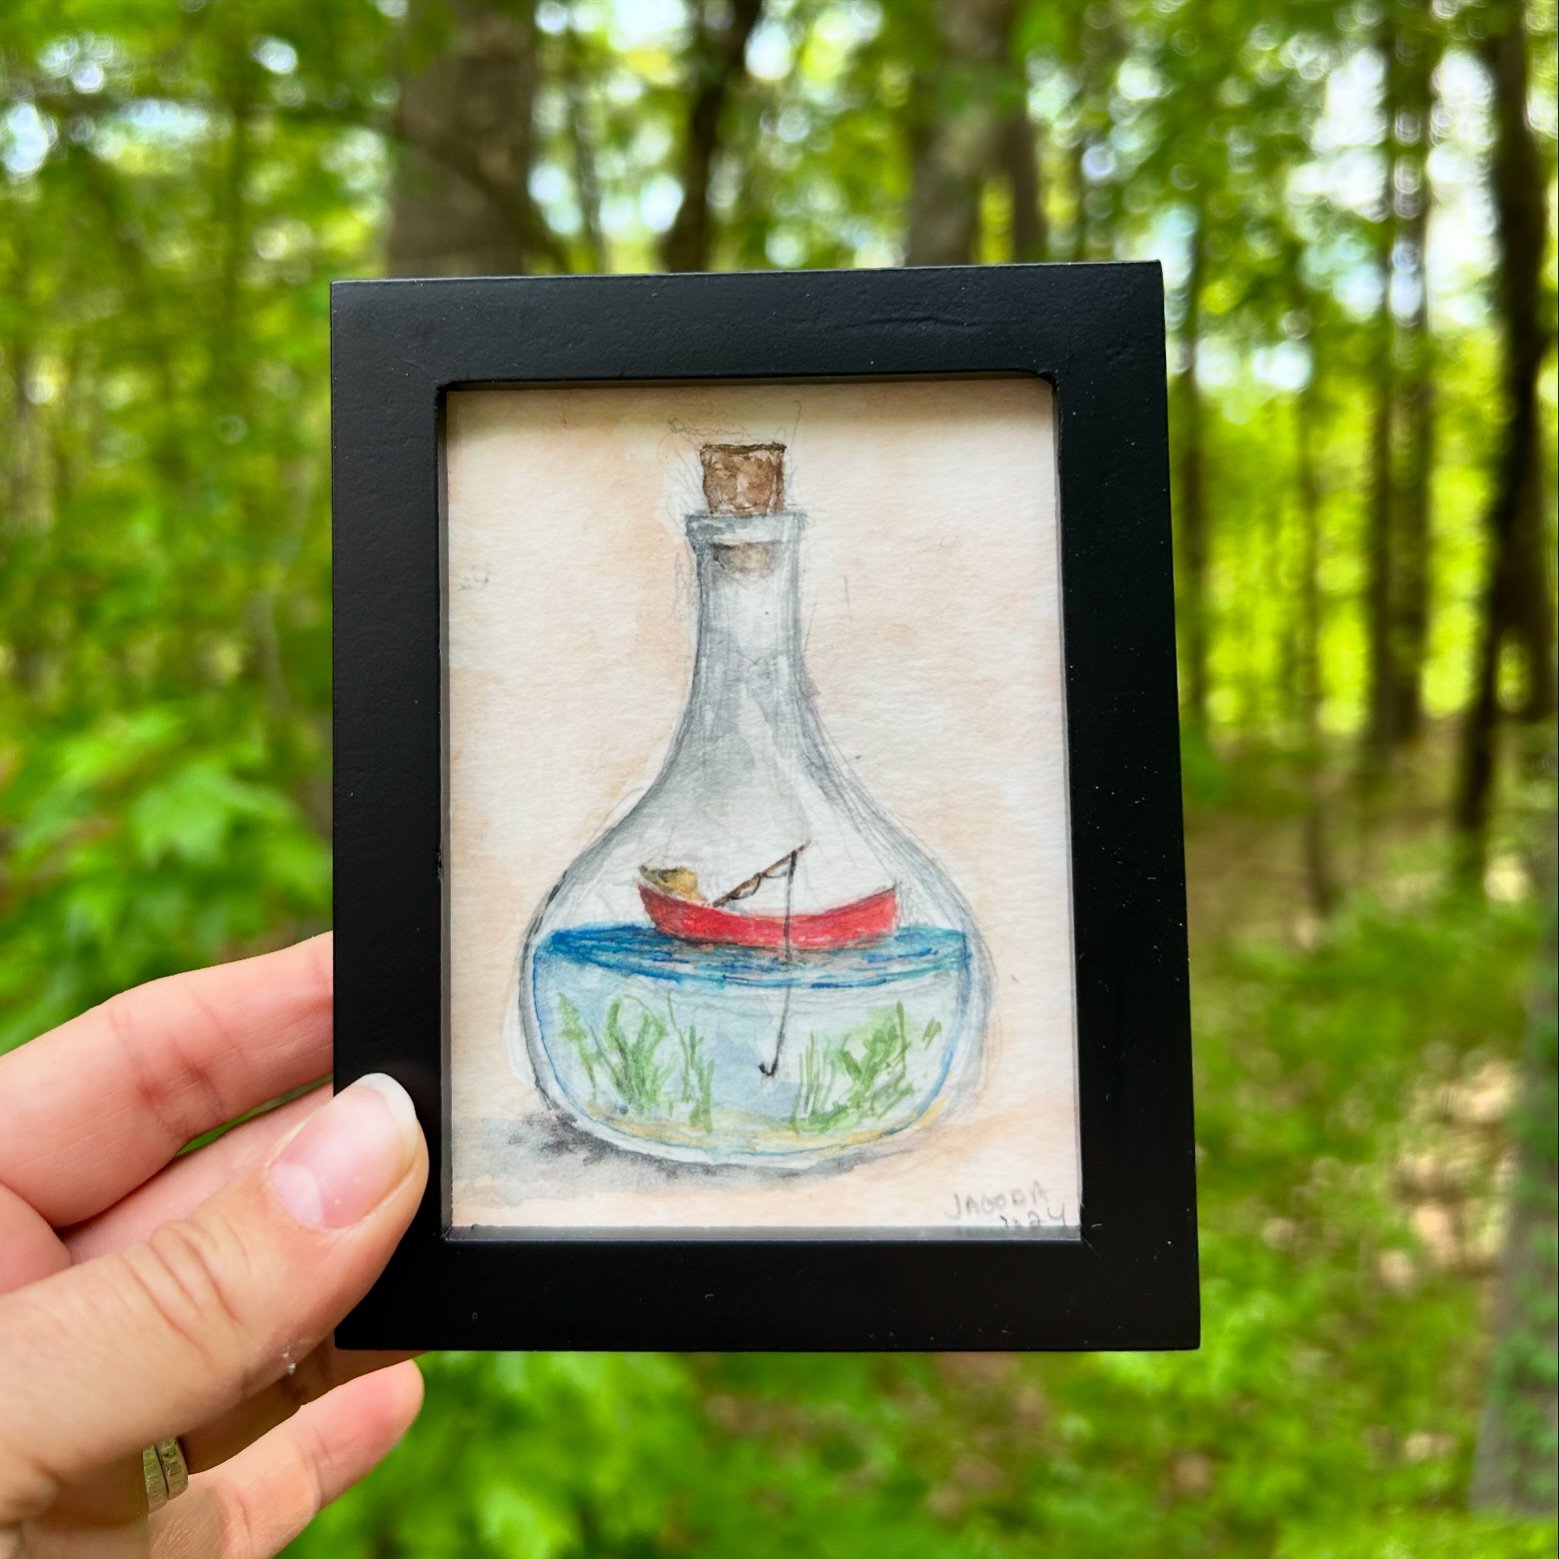 Capturing those lazy, hazy summer days in miniature form! This little gem, along with many others, is making its way to Boston today. 

Find me on Boylston Street by the Public Garden from 11 to 5. Stop by, say hi, and maybe take a piece of summer ho